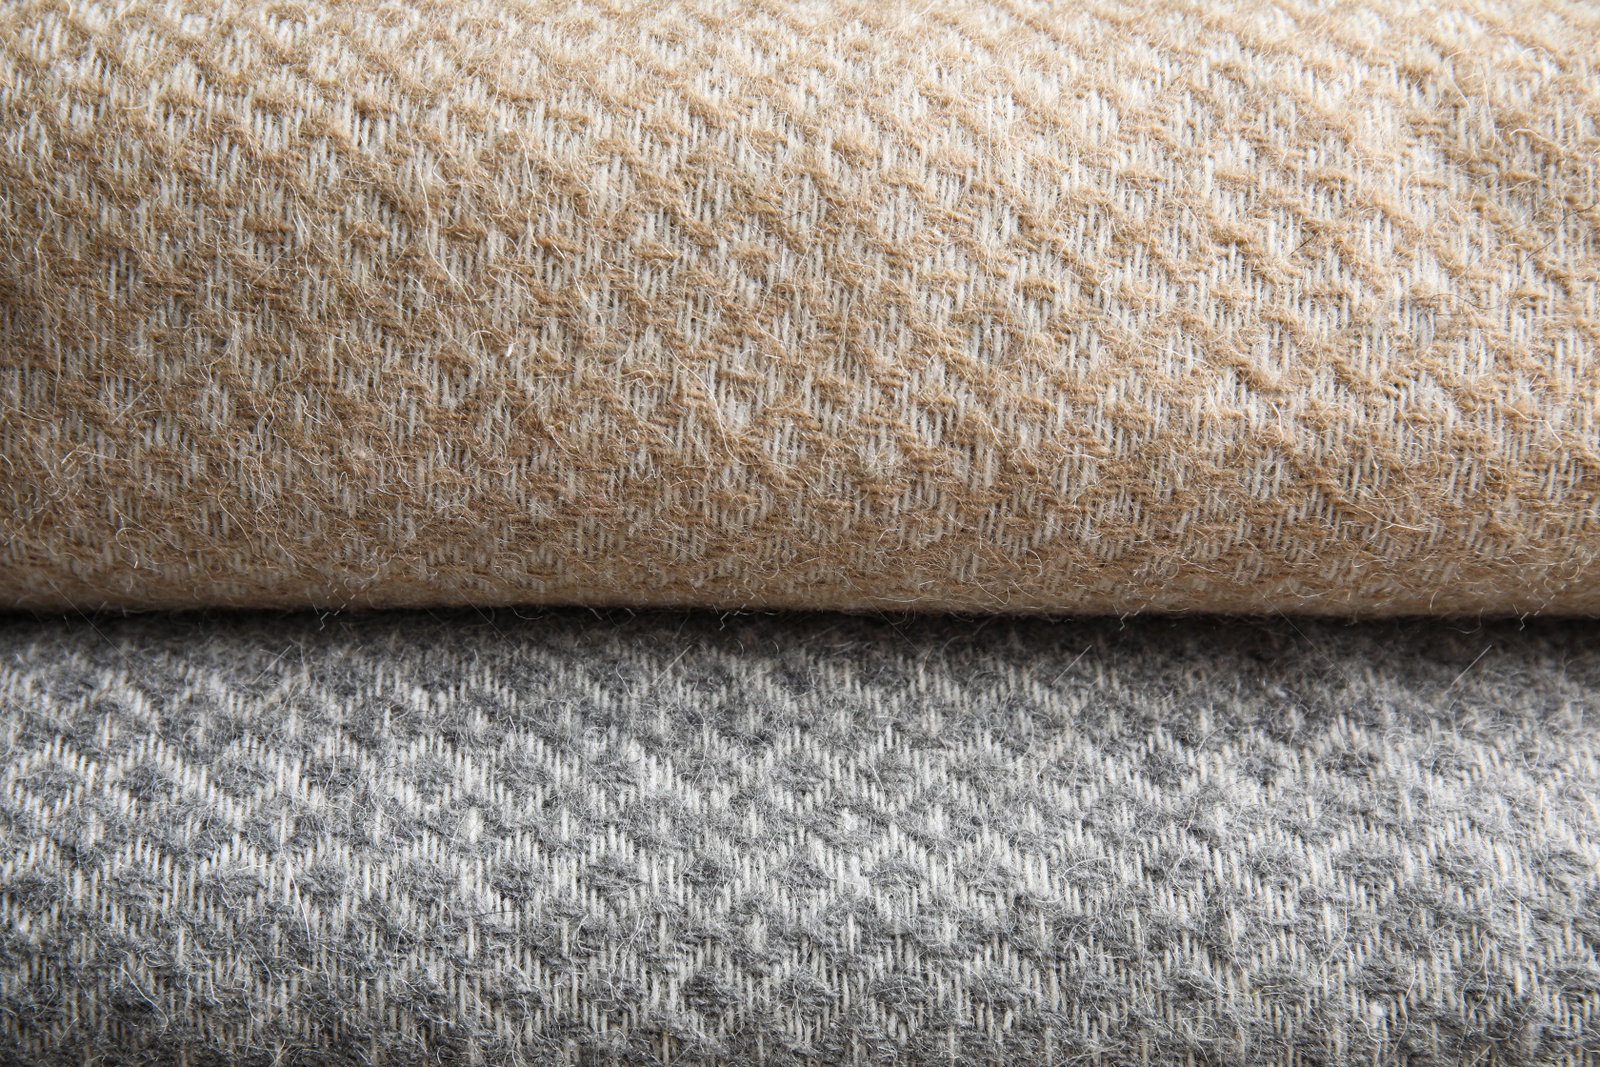 Photo of Beige and grey woolen plaids as background, closeup